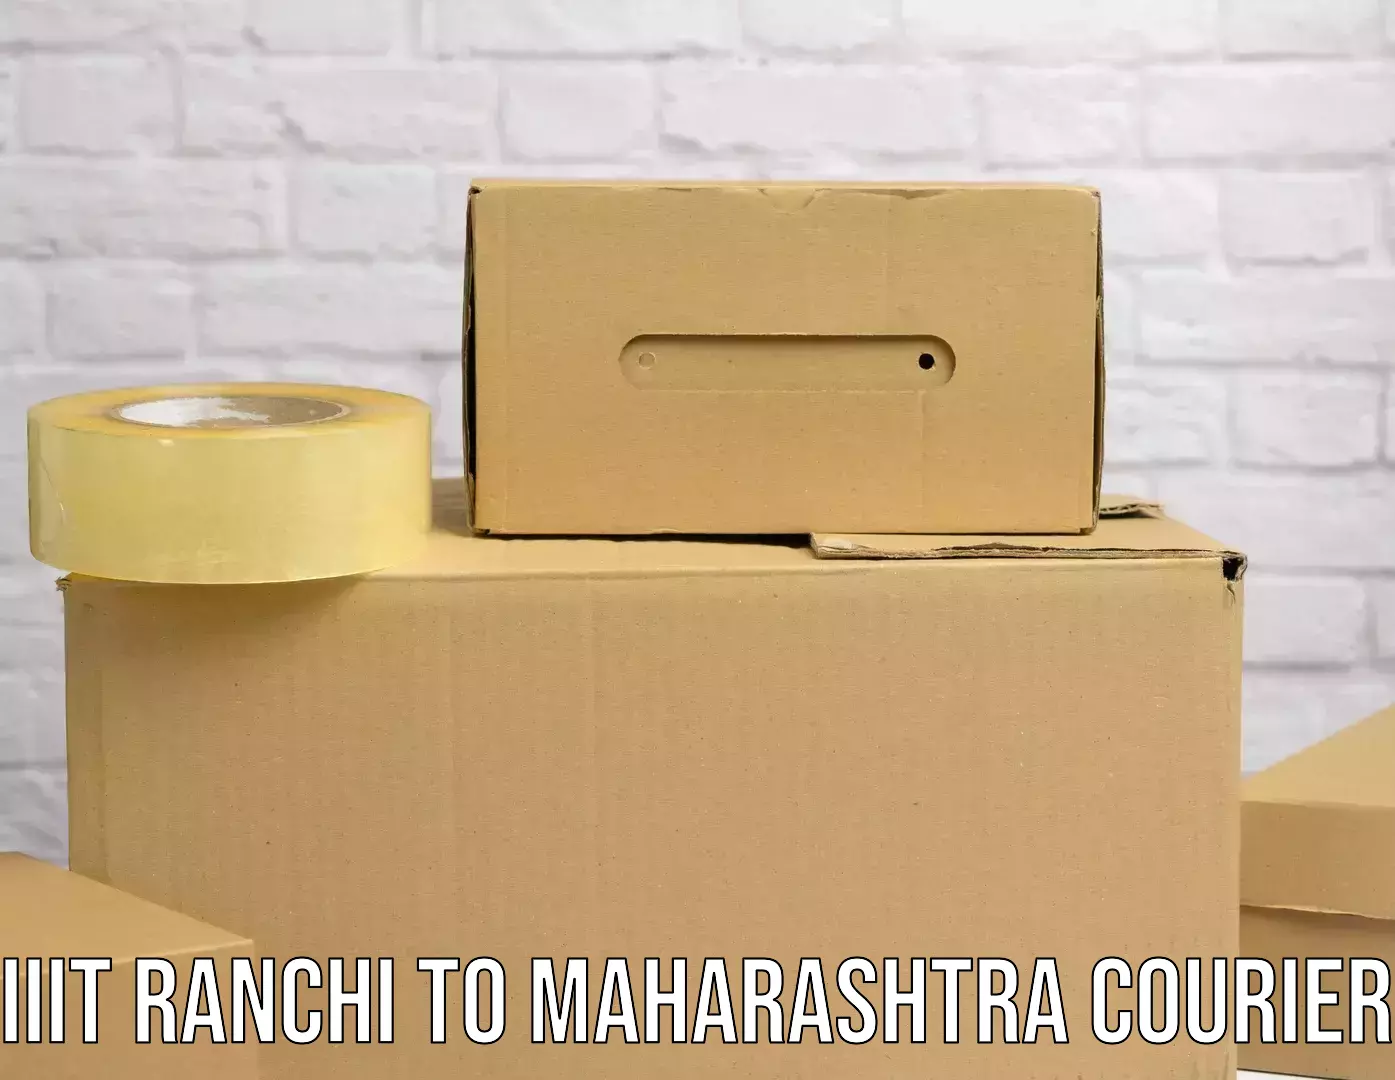 Efficient cargo services IIIT Ranchi to Dharmabad